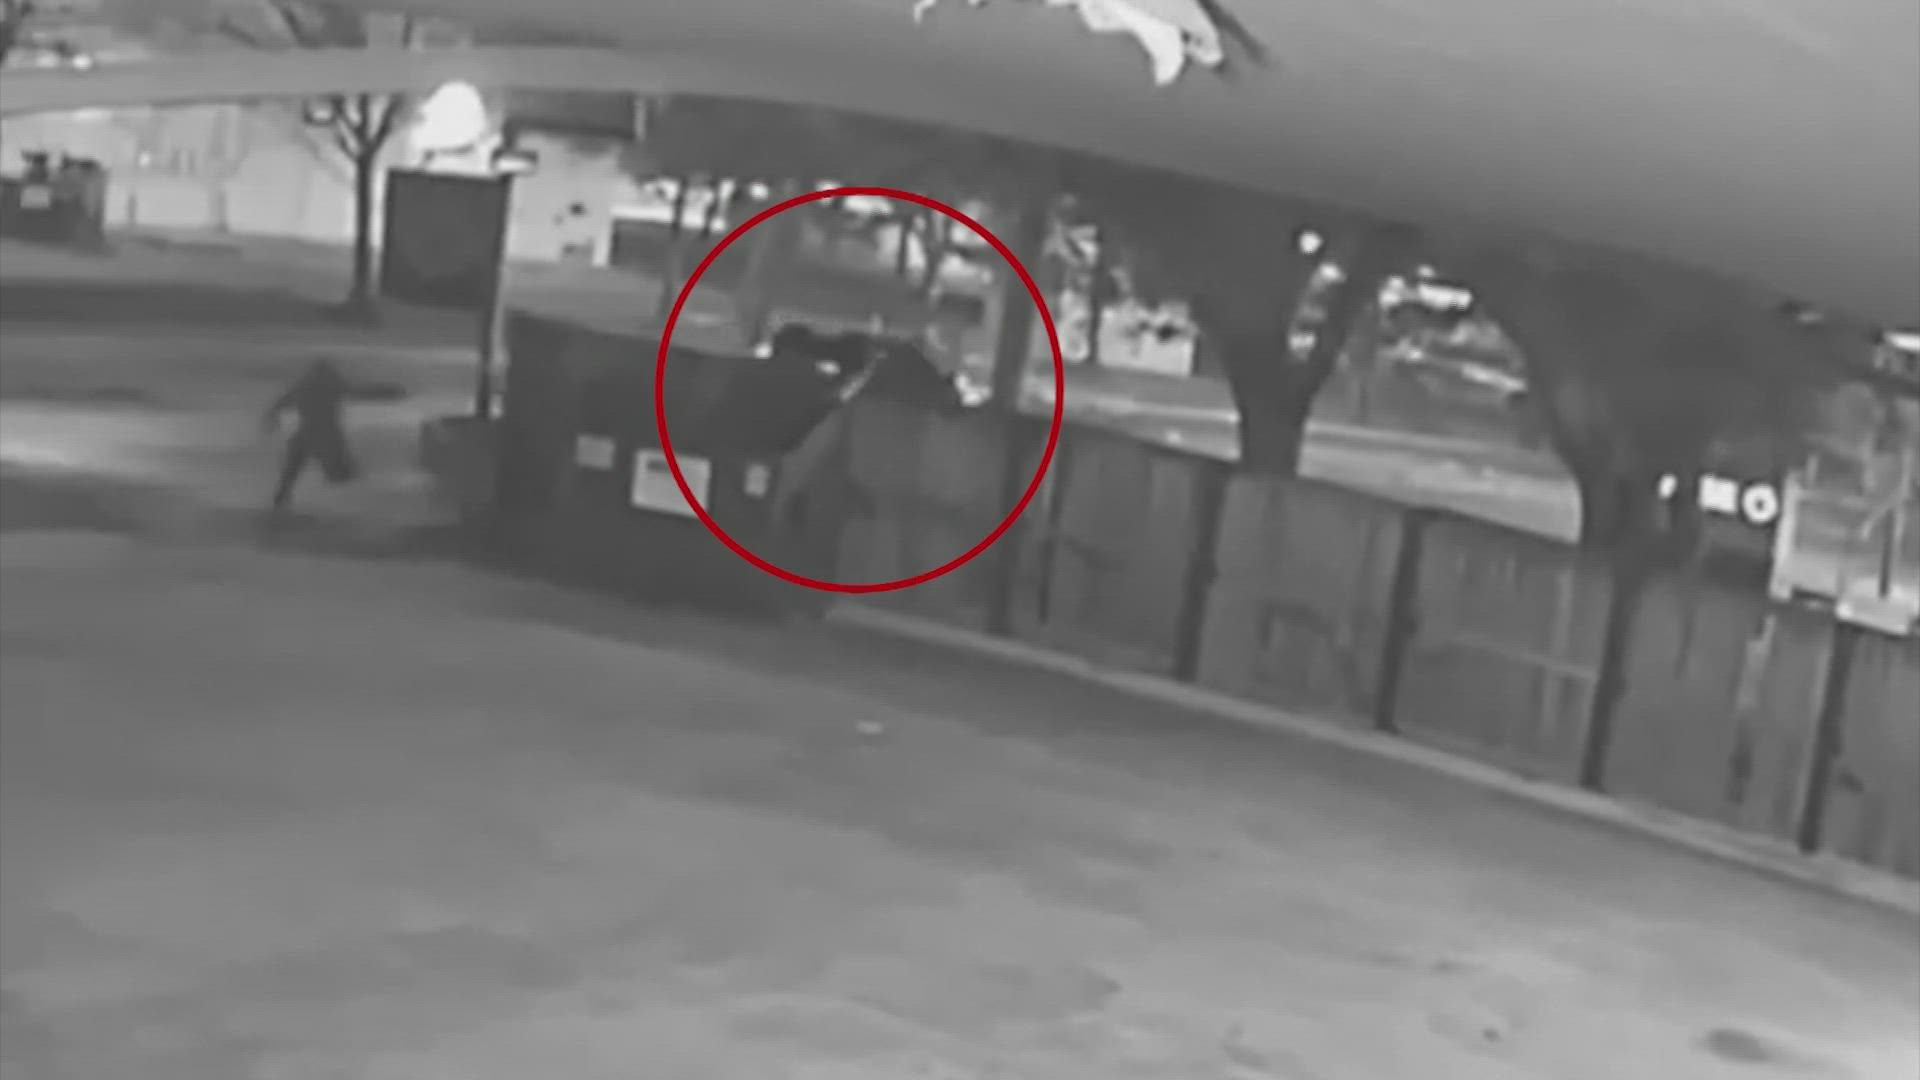 Houston police released a surveillance video that shows the armed robbery that led to a shooting in which 9-year-old Arlene Alvarez was caught in the crossfire.